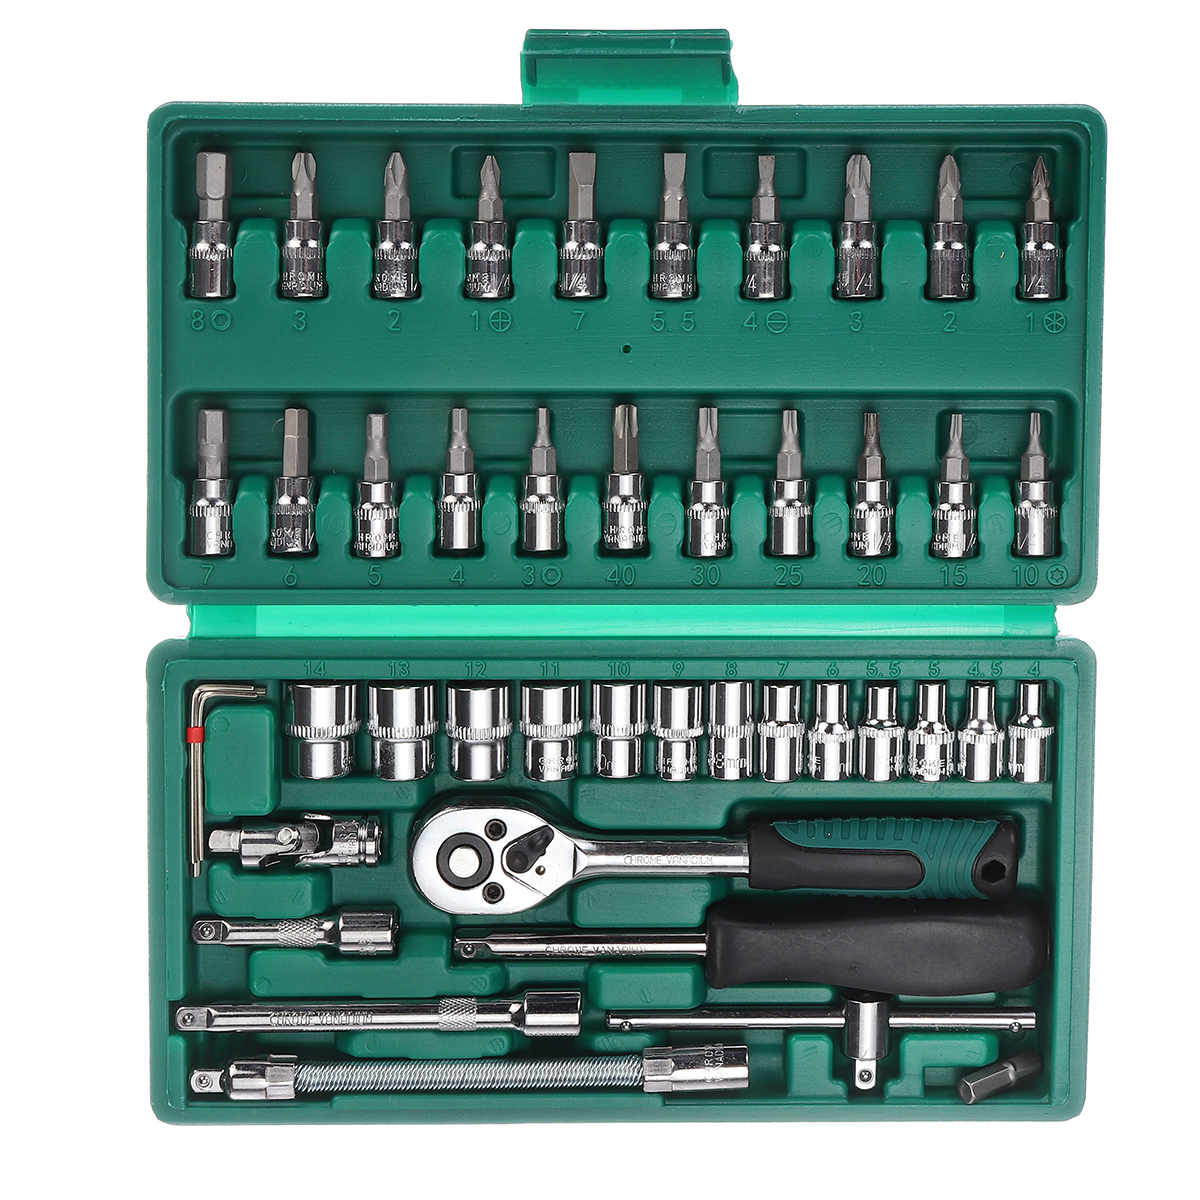 

1/4 Inch Socket Ratchet Wrench Screwdriver Hand Tool Set Household Car AUTO Repair Tool Kit with Plastic Toolbox Storage Case